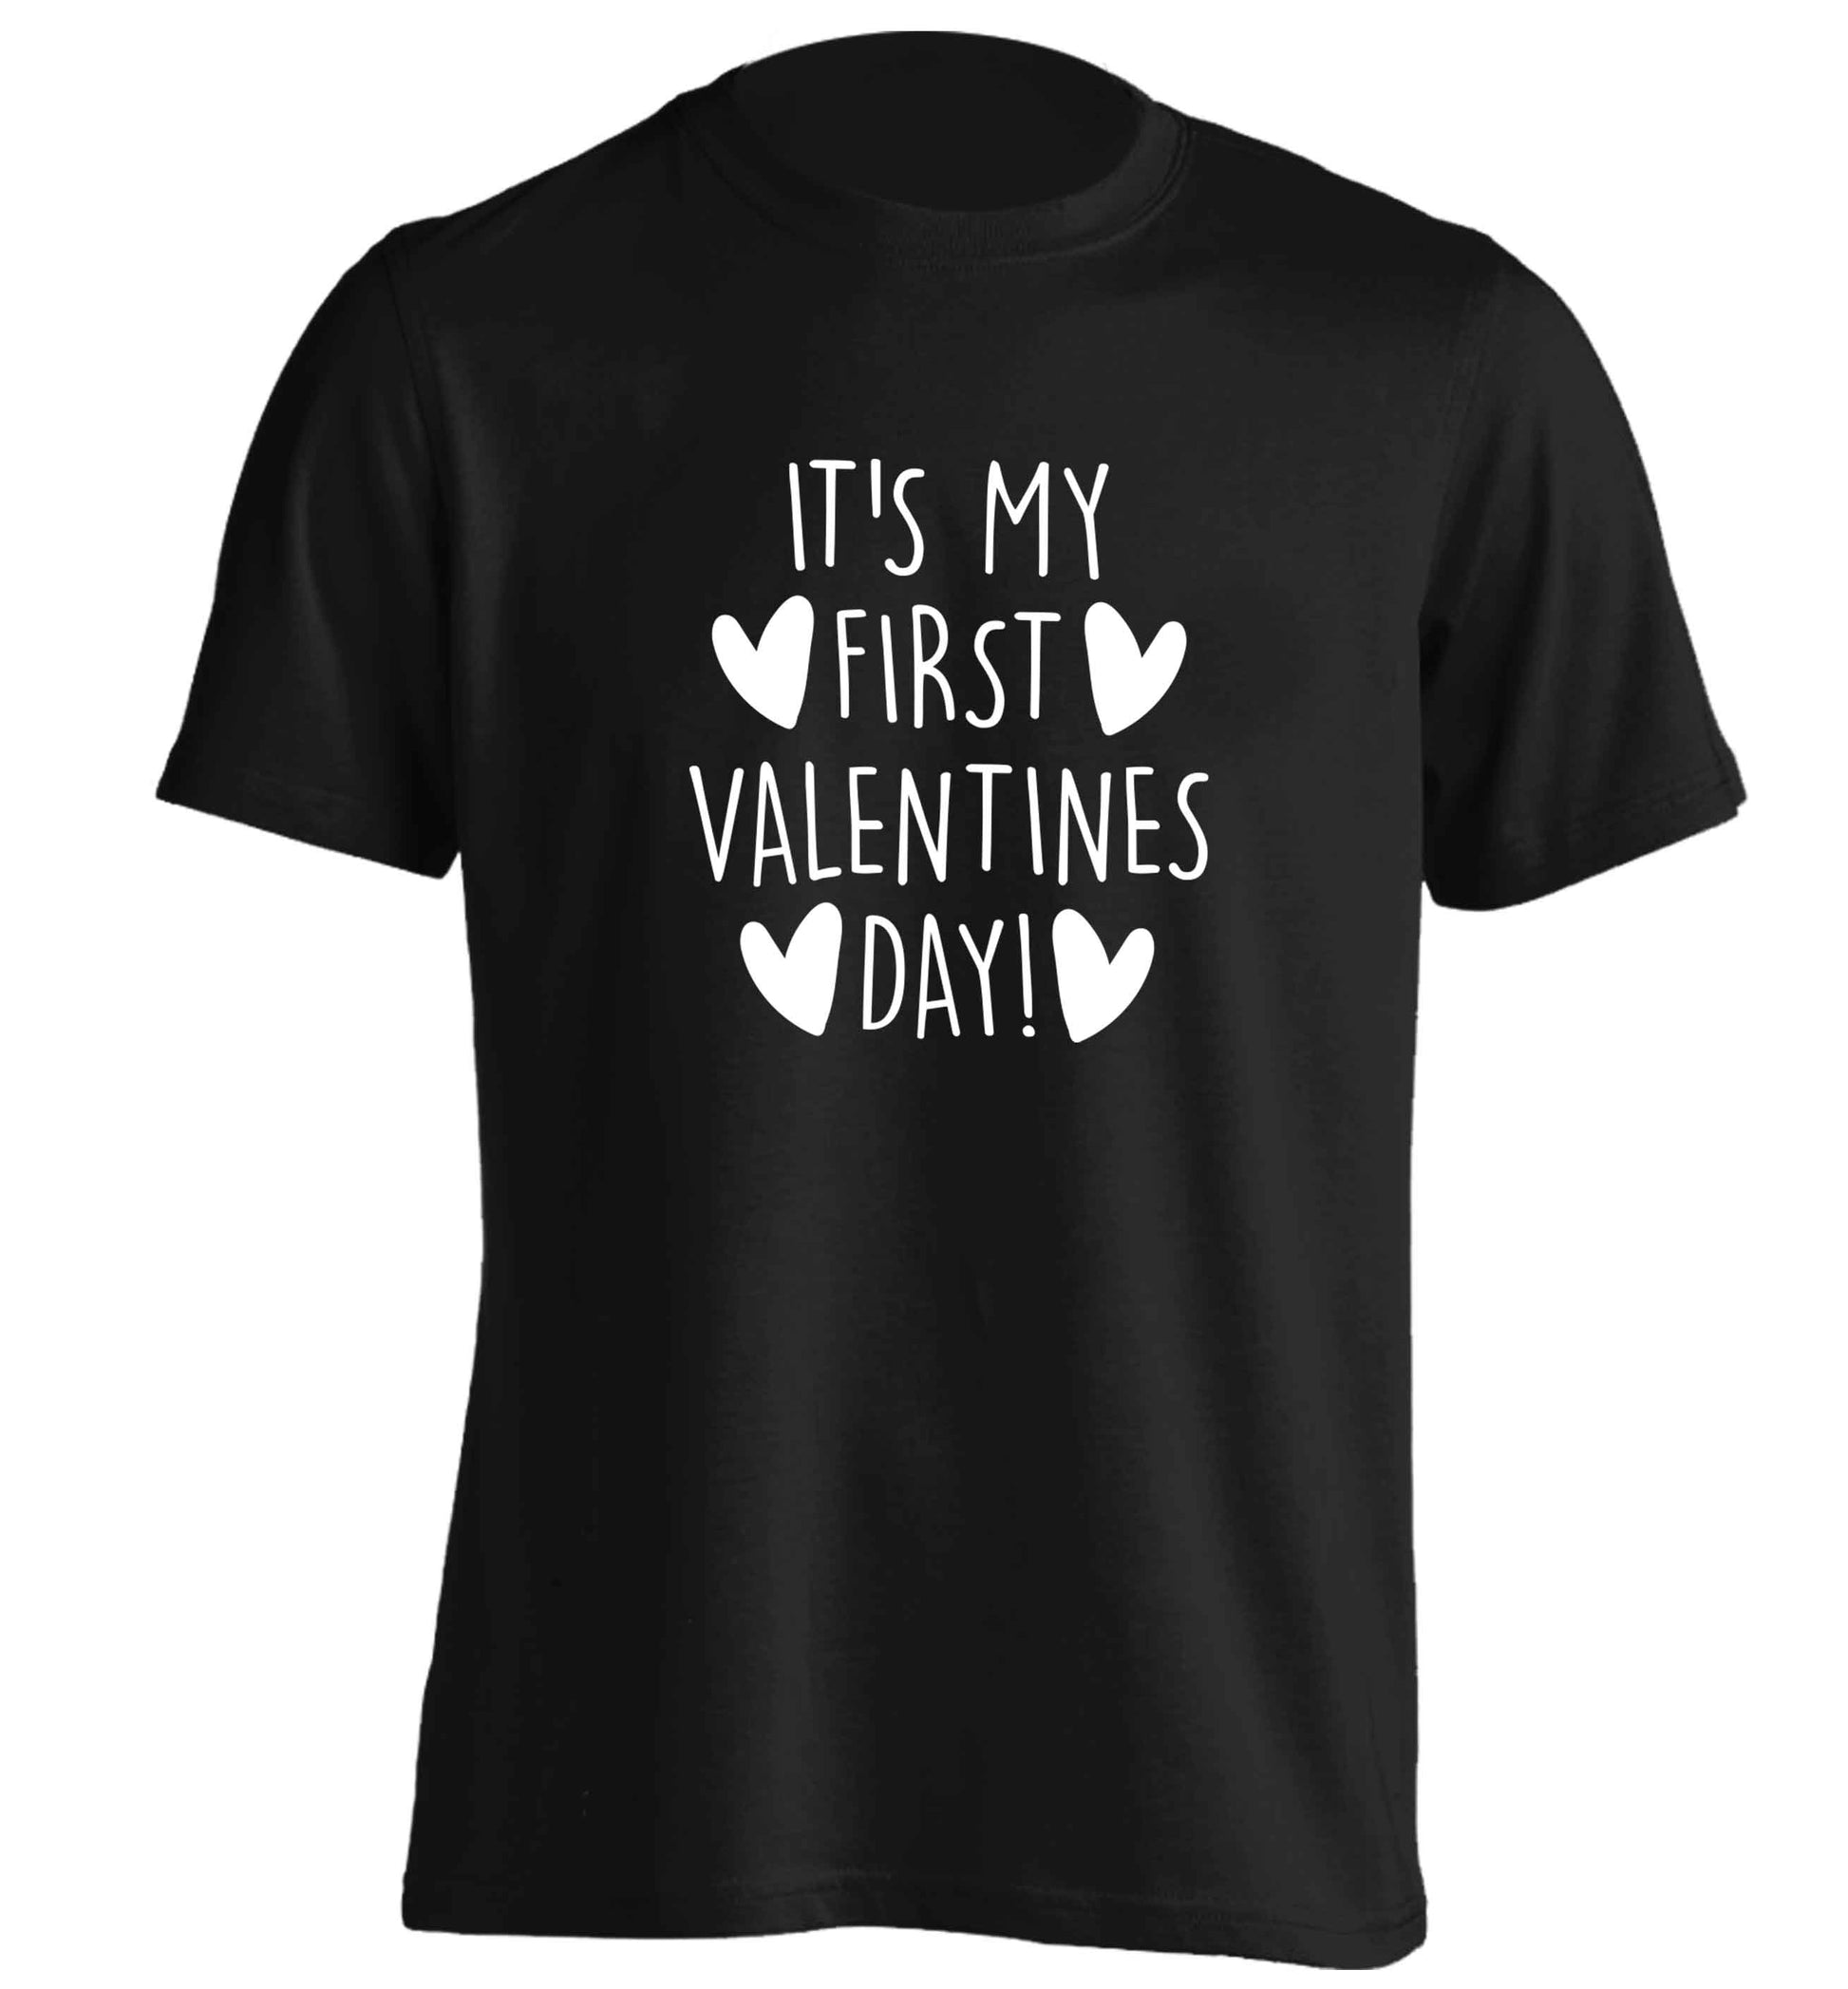 It's my first valentines day! adults unisex black Tshirt 2XL